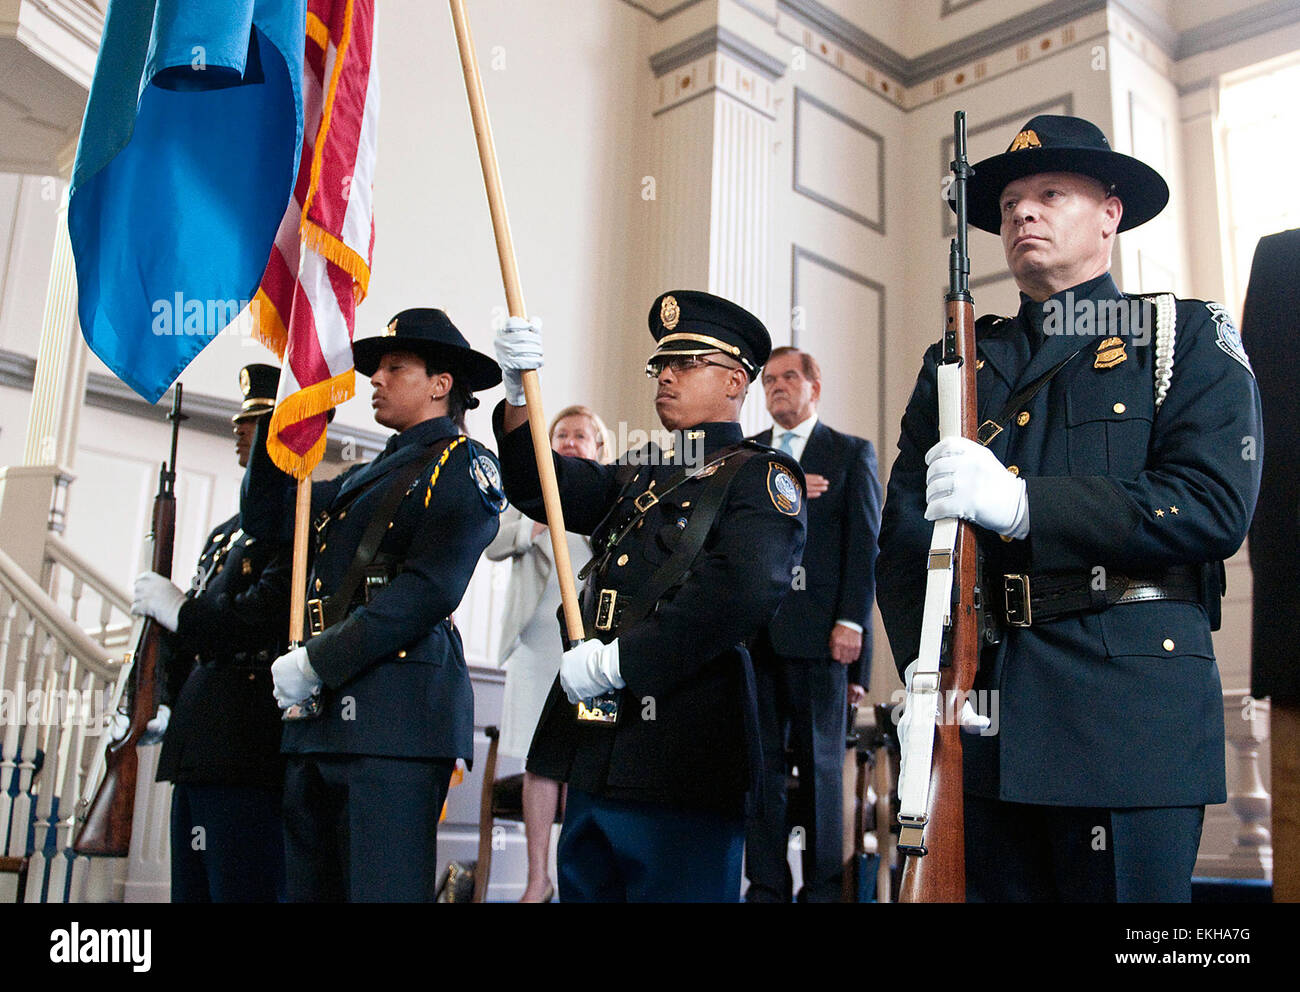 052313: Washington, DC — U.S. Customs and Border Protection took part in the honor guard (far right) when Secretary of Homeland Security Janet Napolitano hosted the first U.S. Department of Homeland Security (DHS) Portrait Unveiling Ceremony in honor of Governor Tom Ridge (seen in rear)—our nation’s first Secretary of Homeland Security.  Barry Bahler Stock Photo